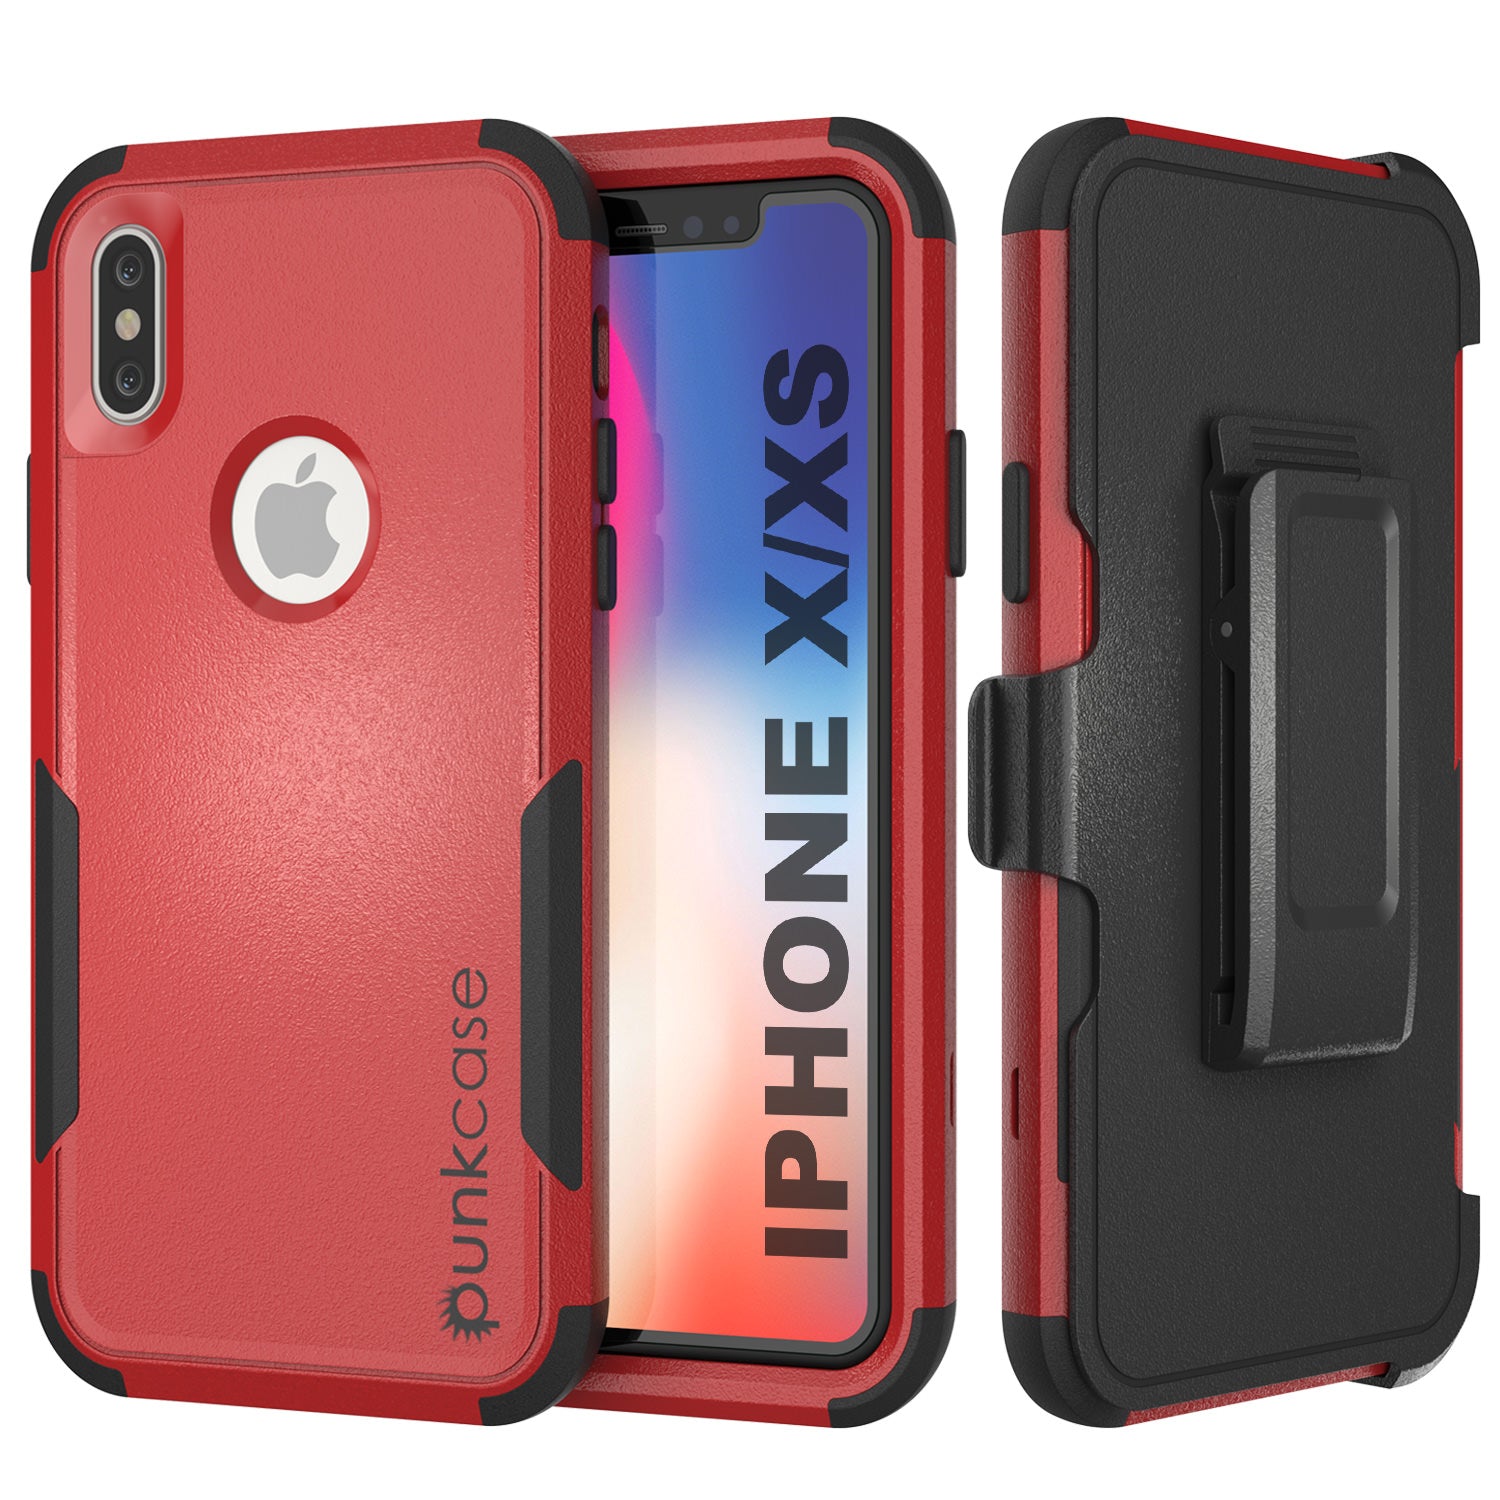 iPhone X/XS case - The Powerful Collection